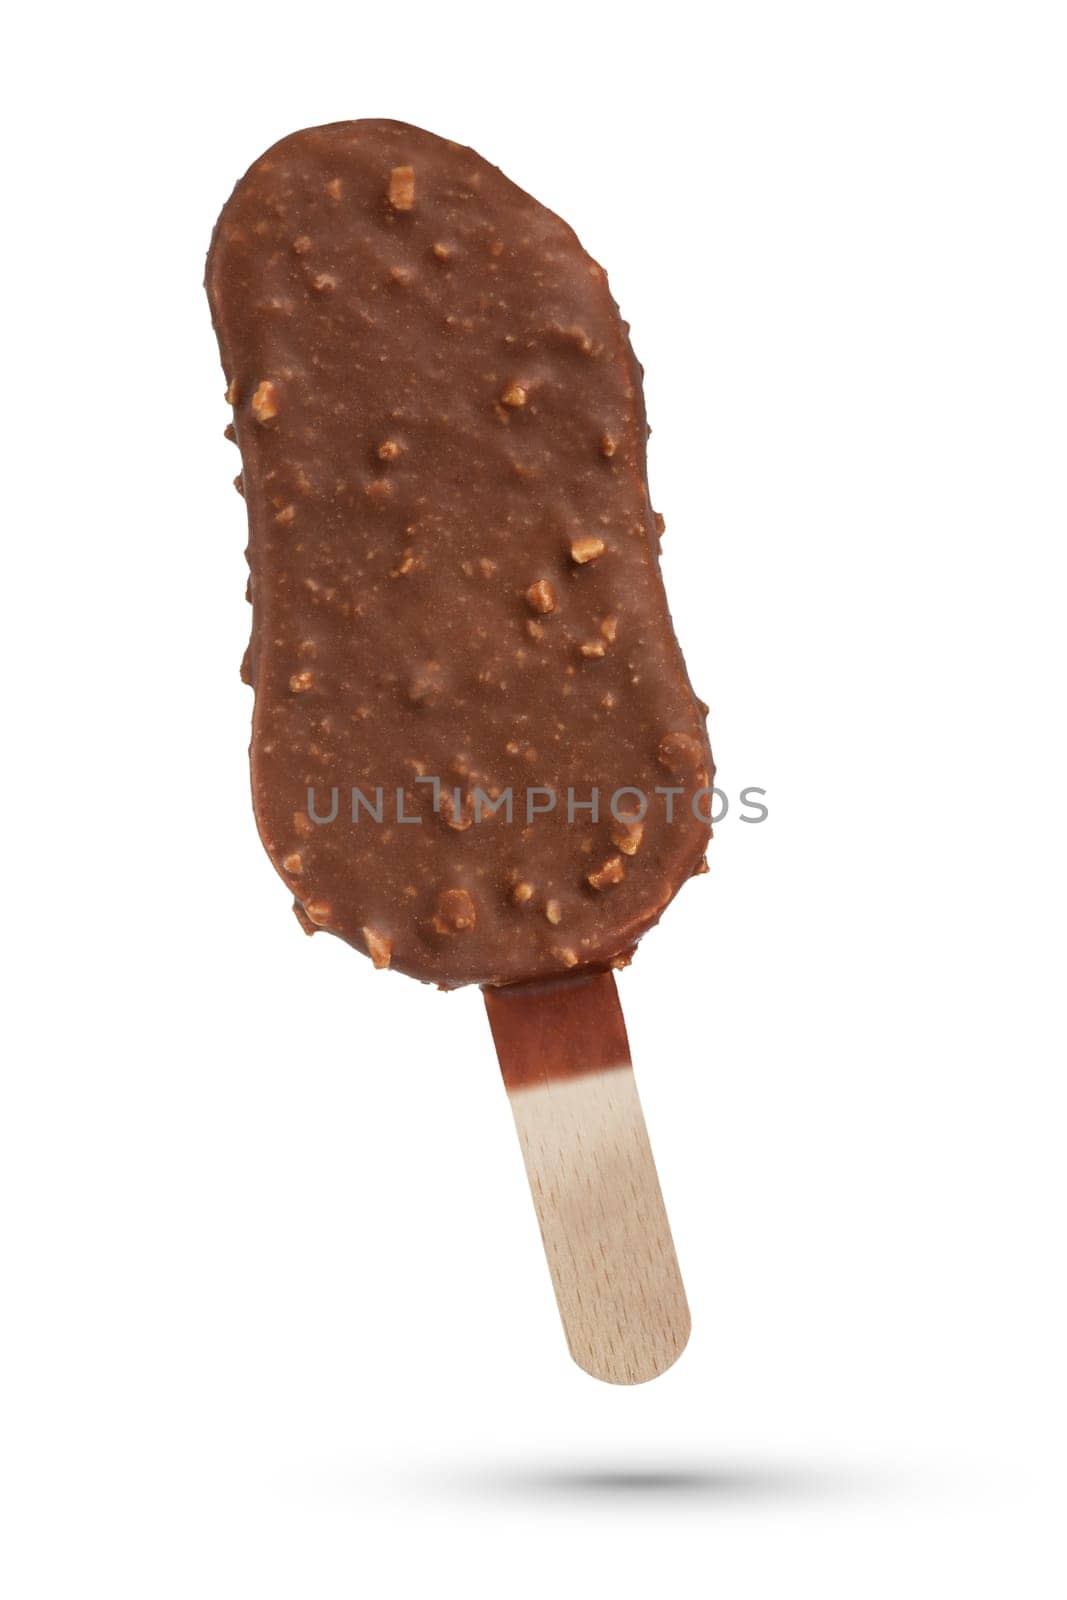 Ice cream on a stick, on a white isolated background. Ice cream covered in dark chocolate with hazelnuts. Ice cream scoop isolate for inserting into a design or project. by SERSOL